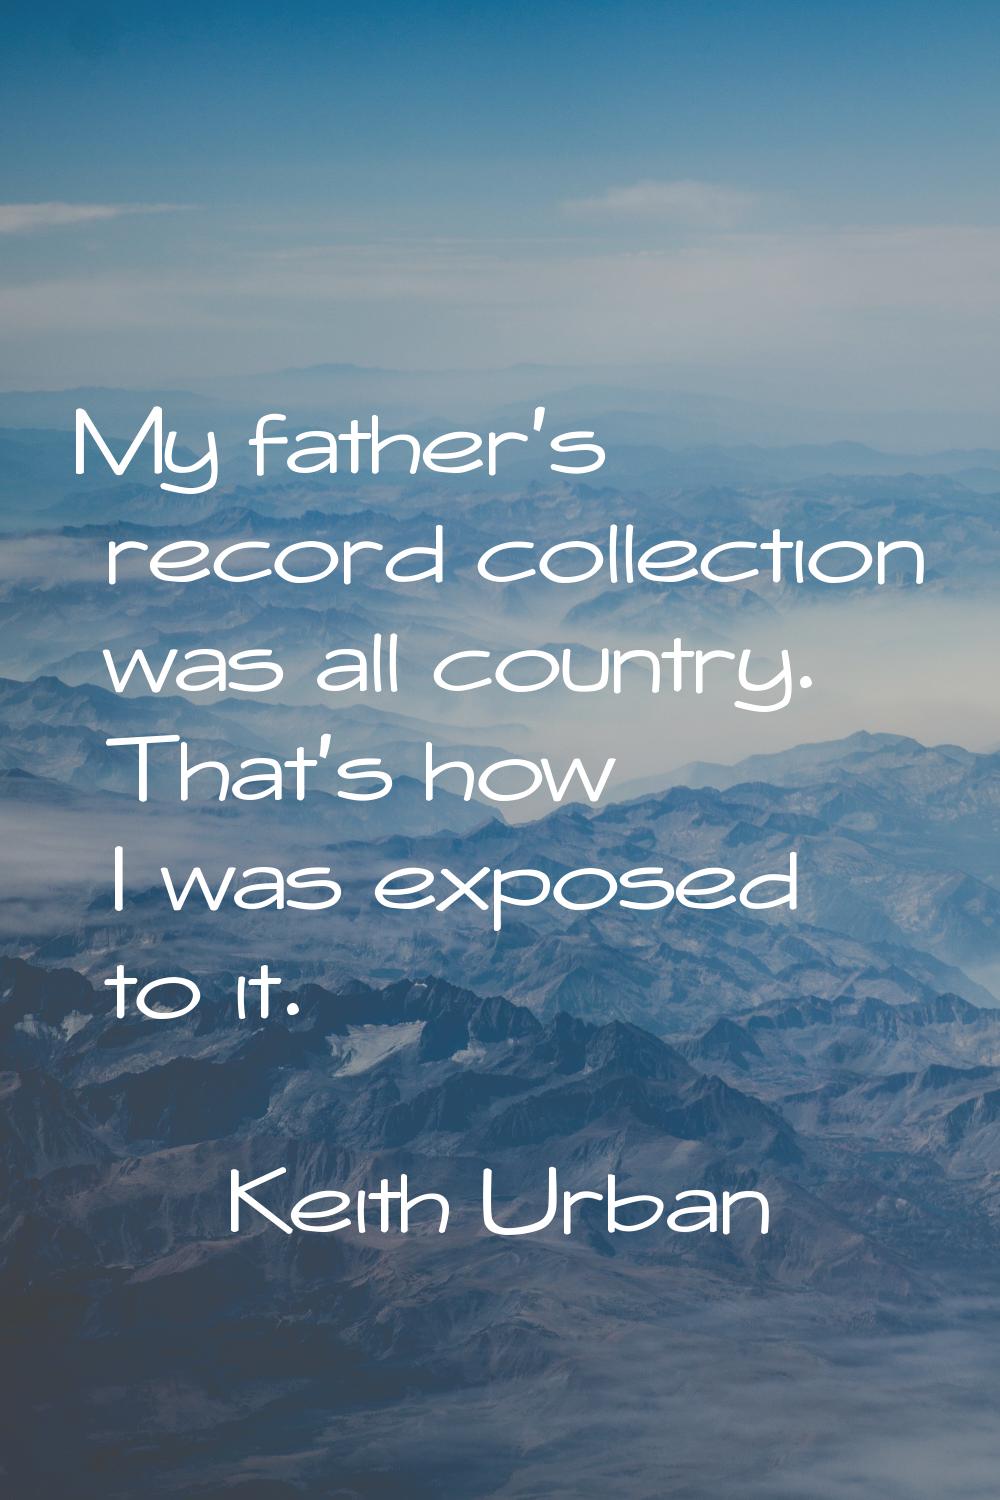 My father's record collection was all country. That's how I was exposed to it.